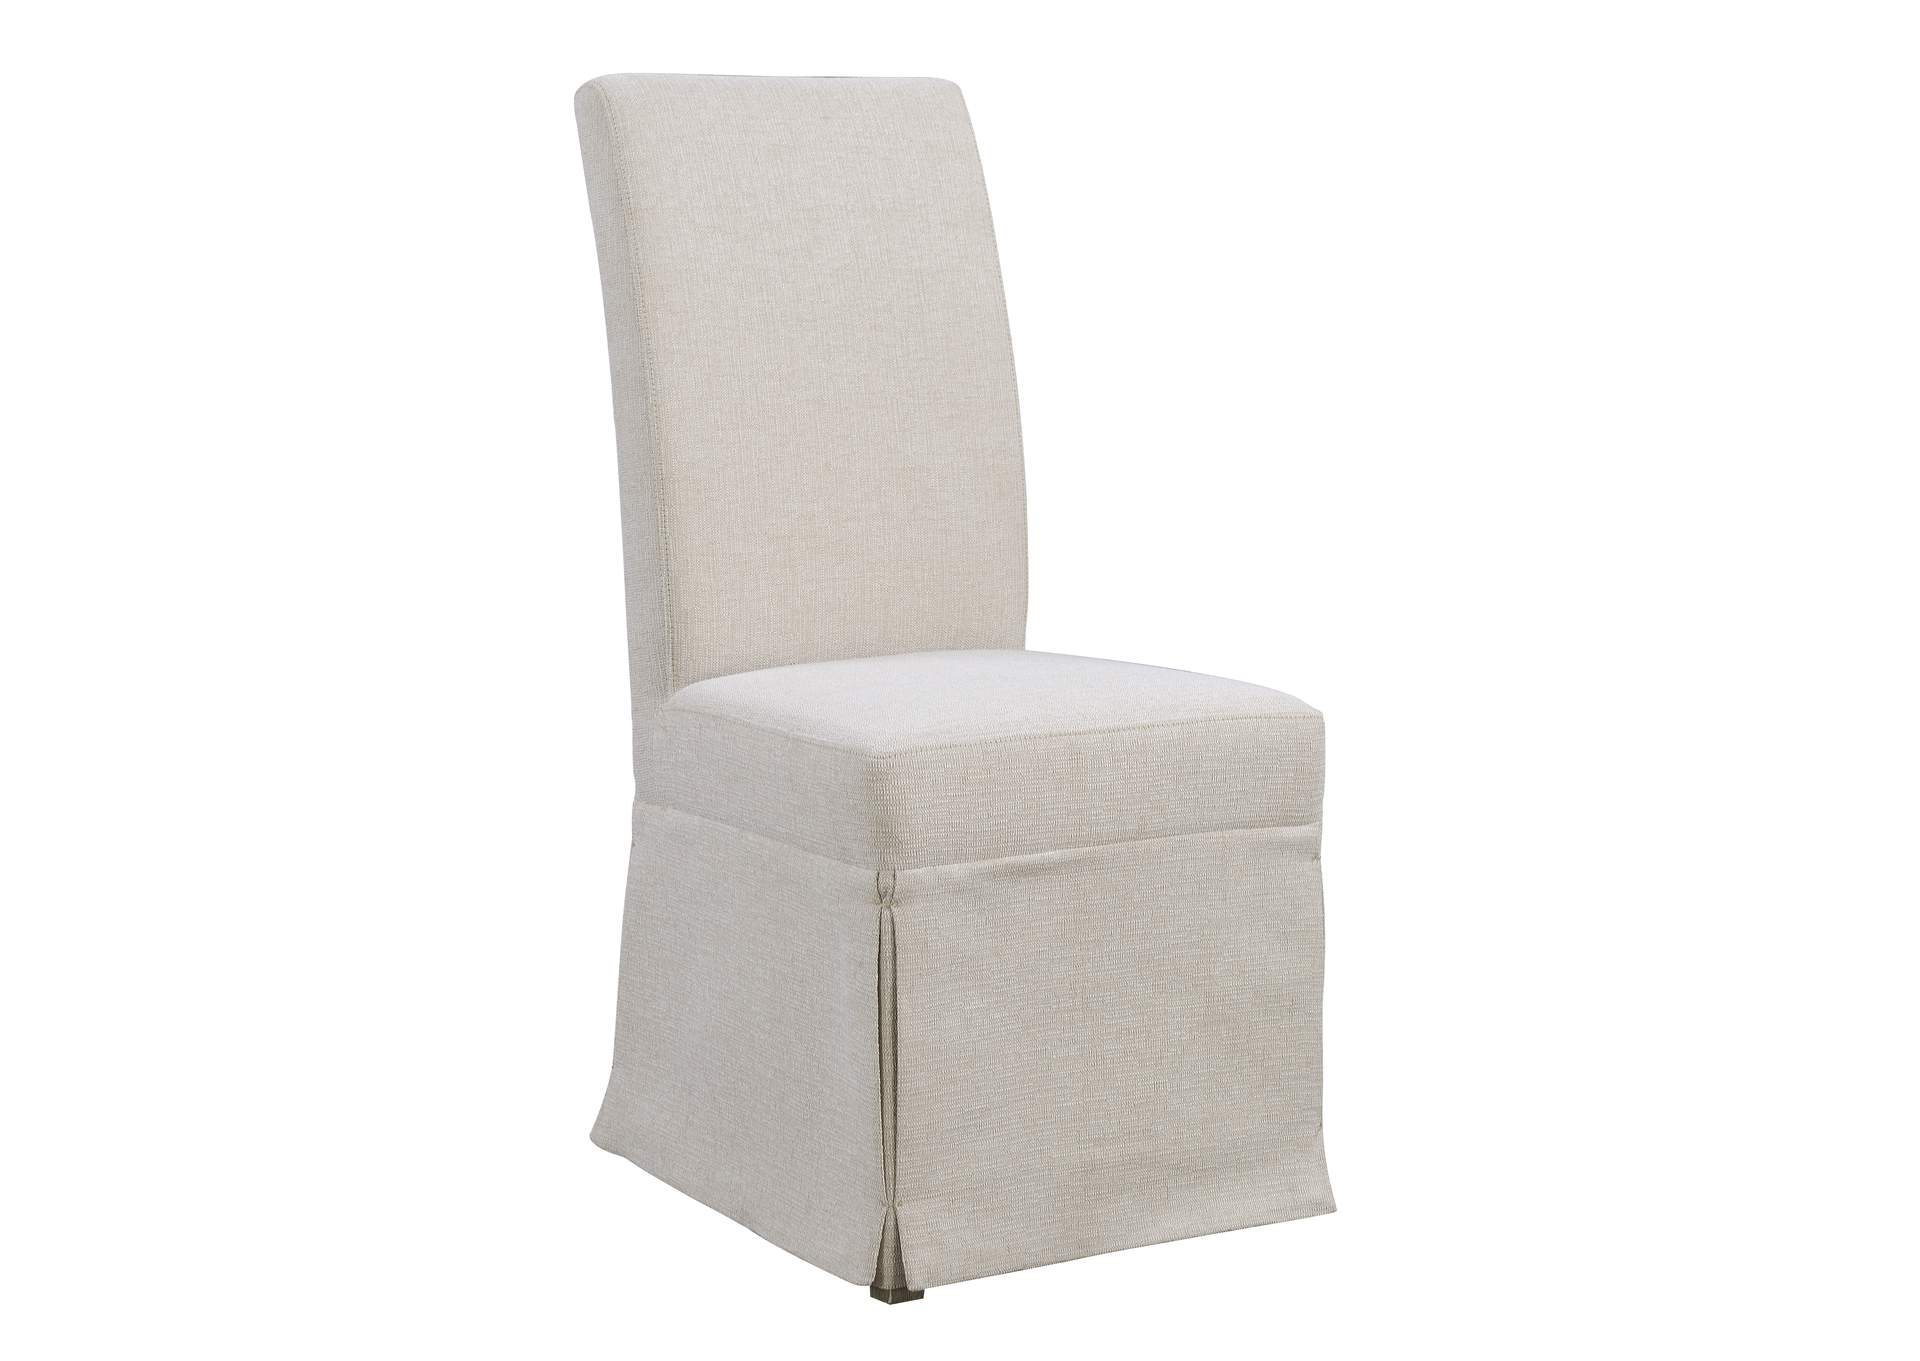 Paladin Linen Buff Upholstered Skirted, Upholstered Skirted Parsons Dining Chairs